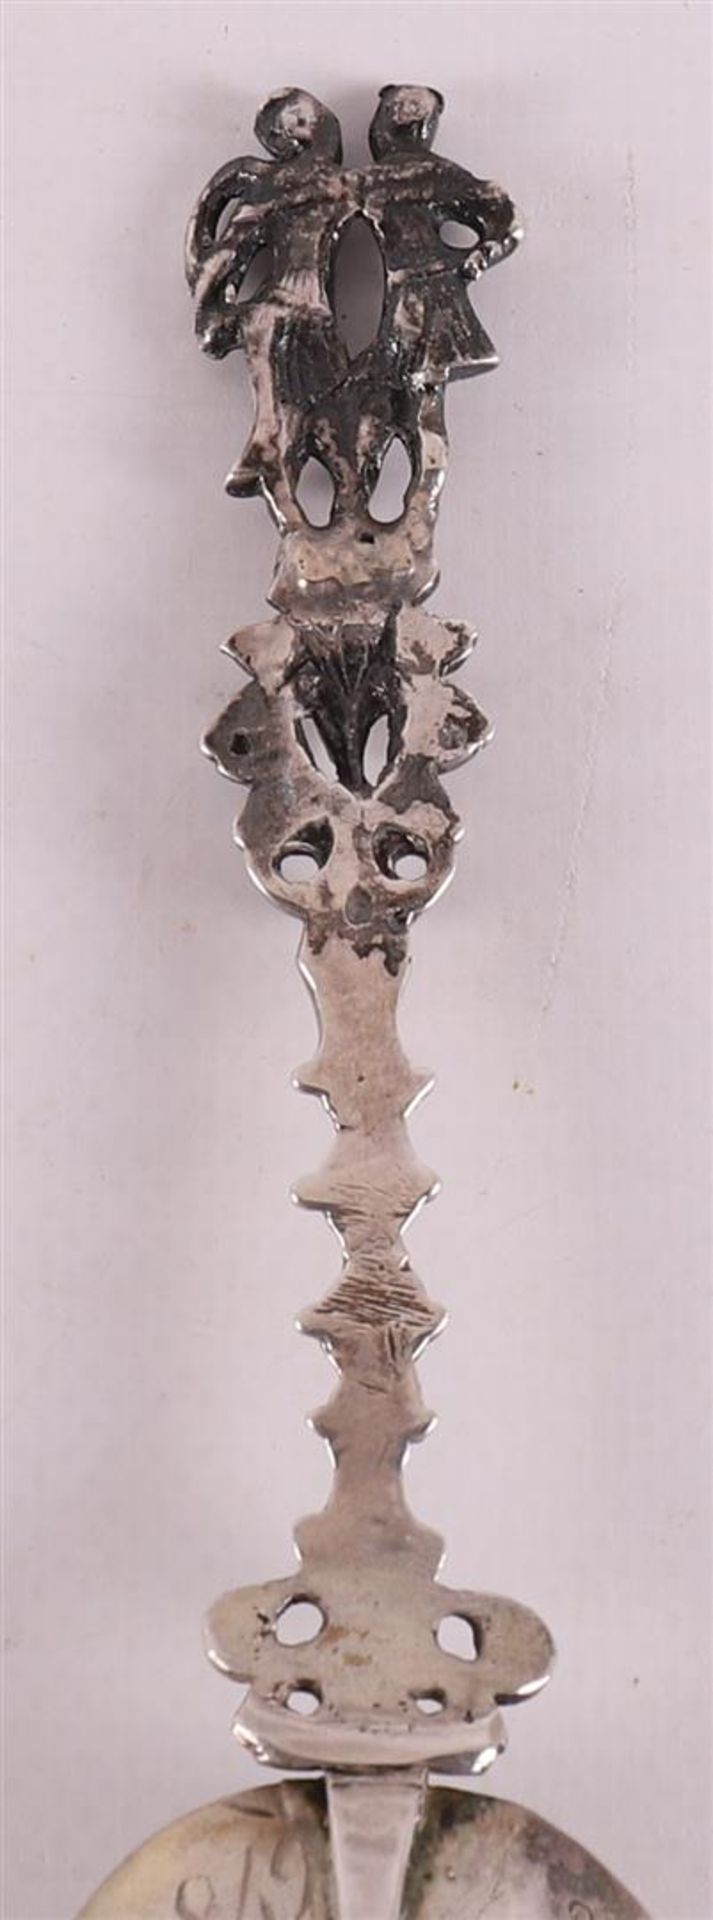 A silver birth spoon with crowning couple, Friesland, 19th century. - Image 2 of 3